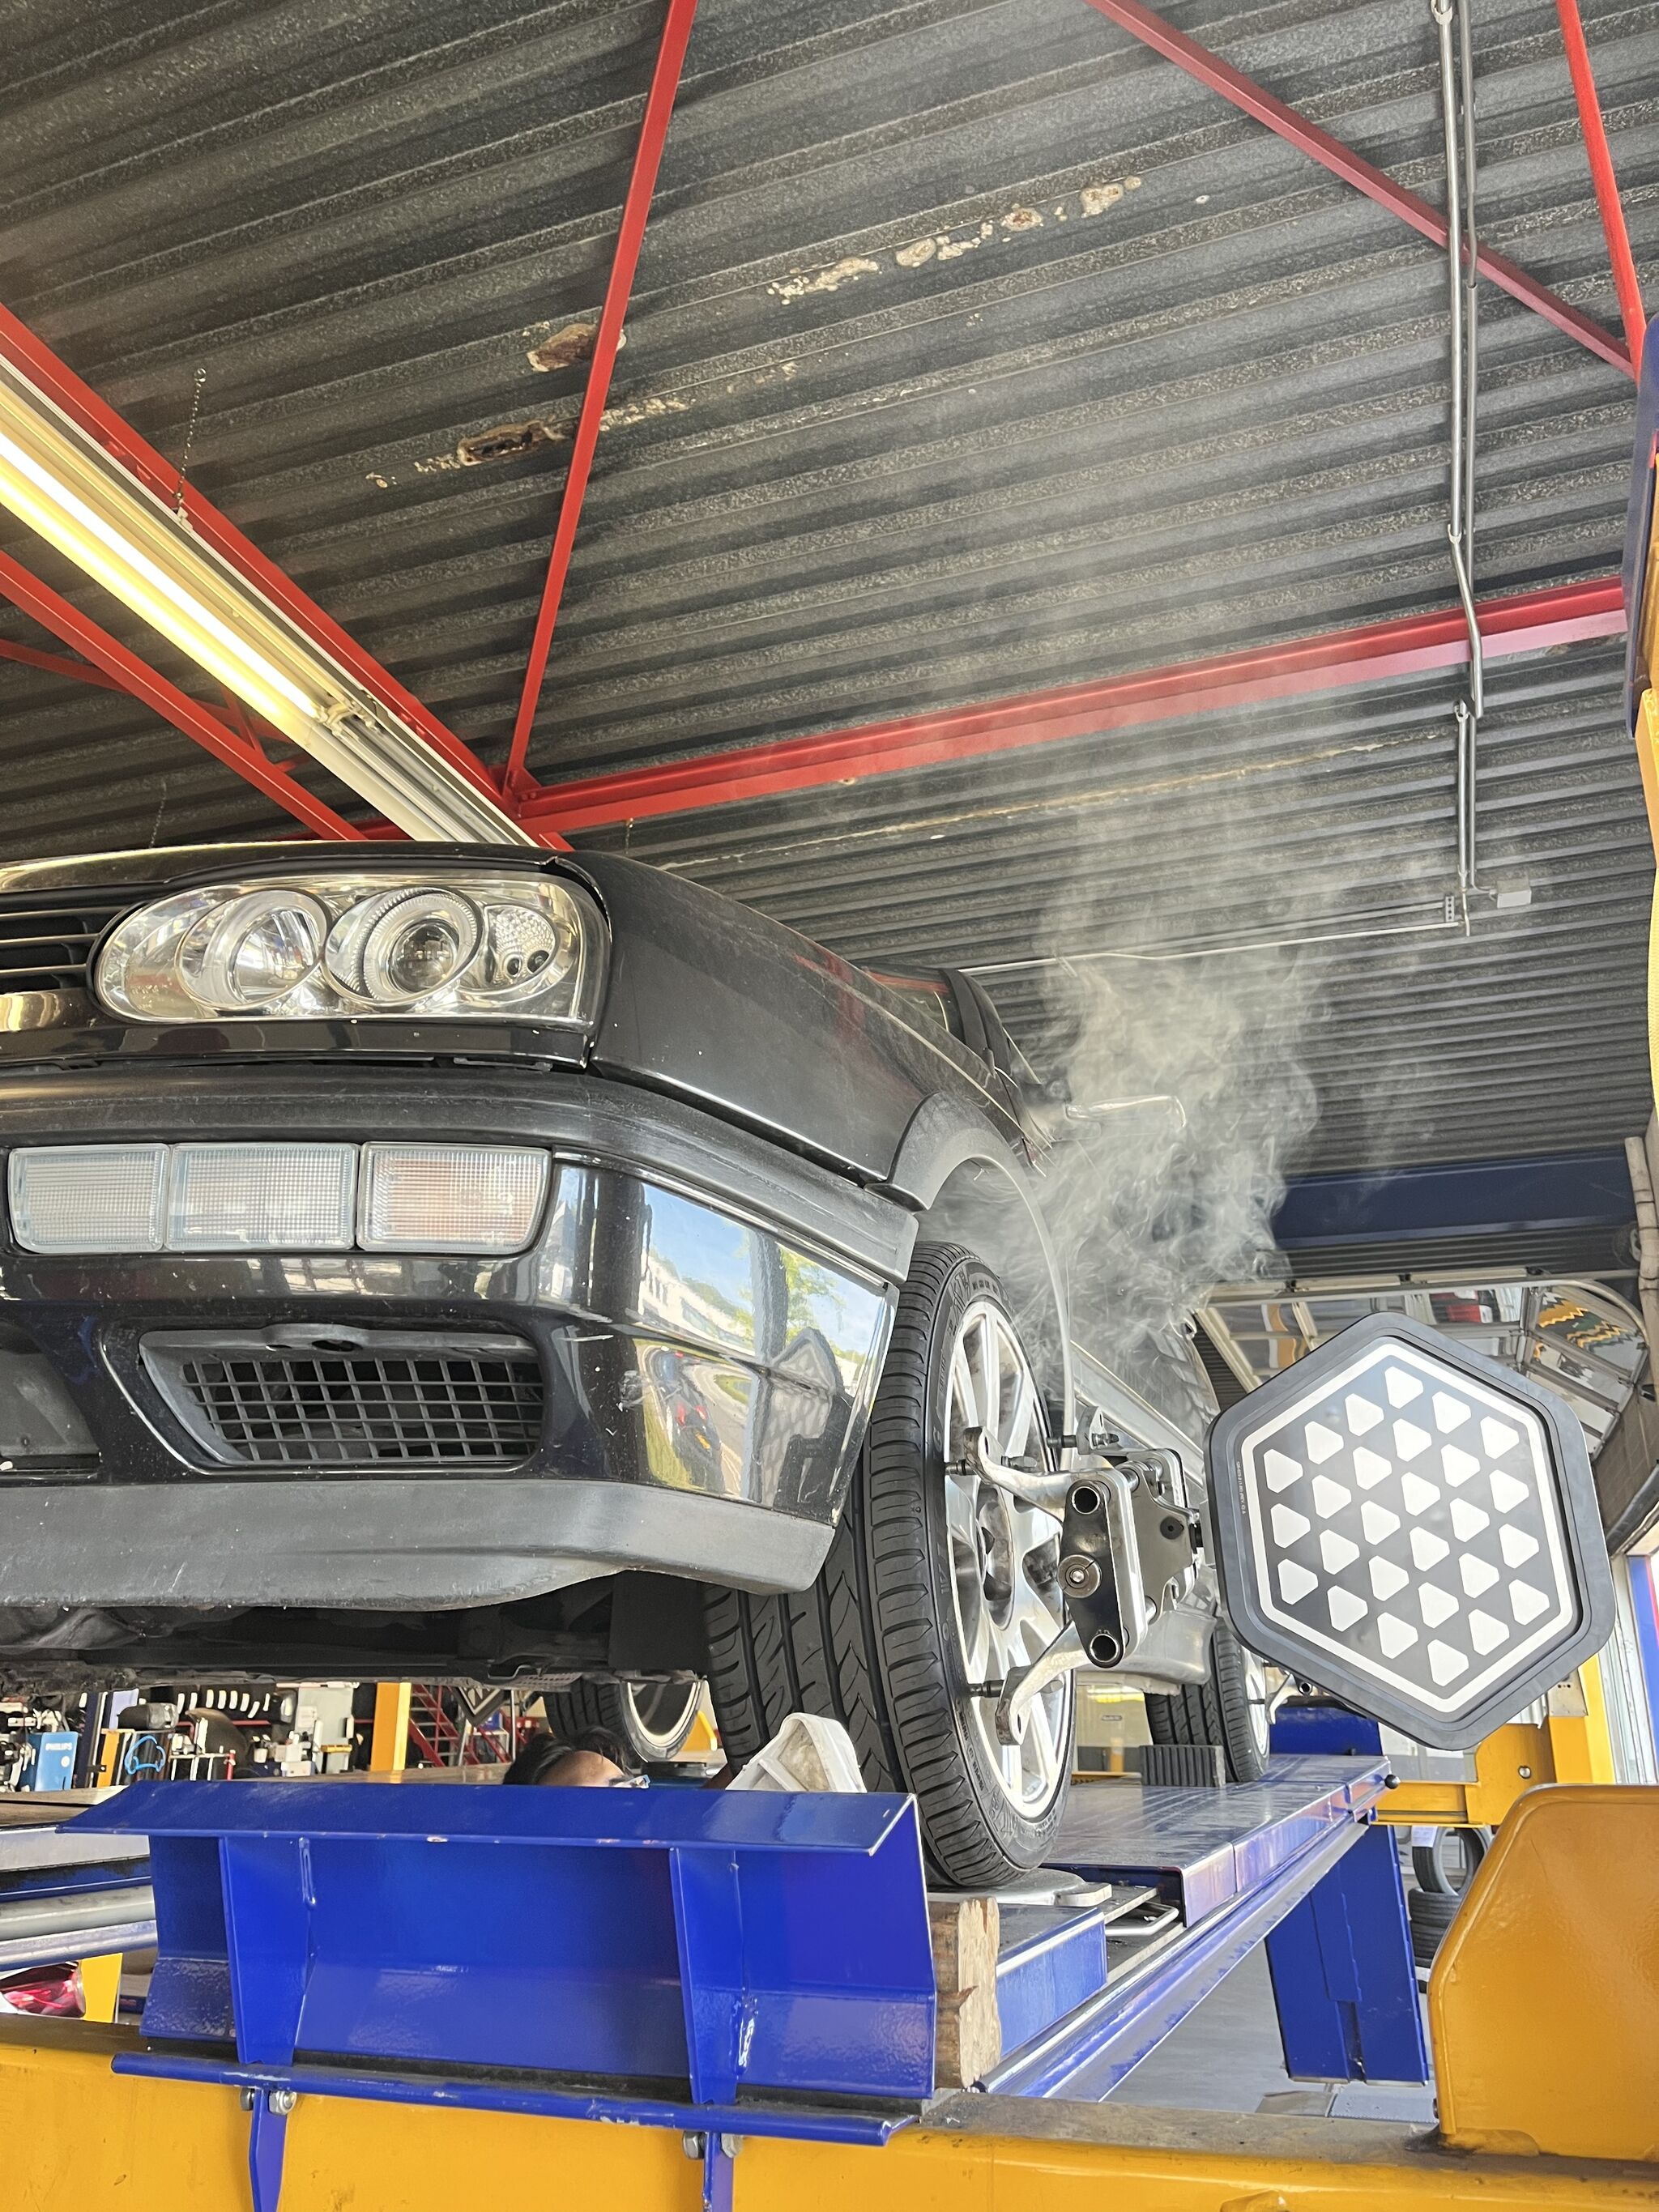 The mechanic doing the wheel alignment was cursing like a sailor — and applying the necessary heat.